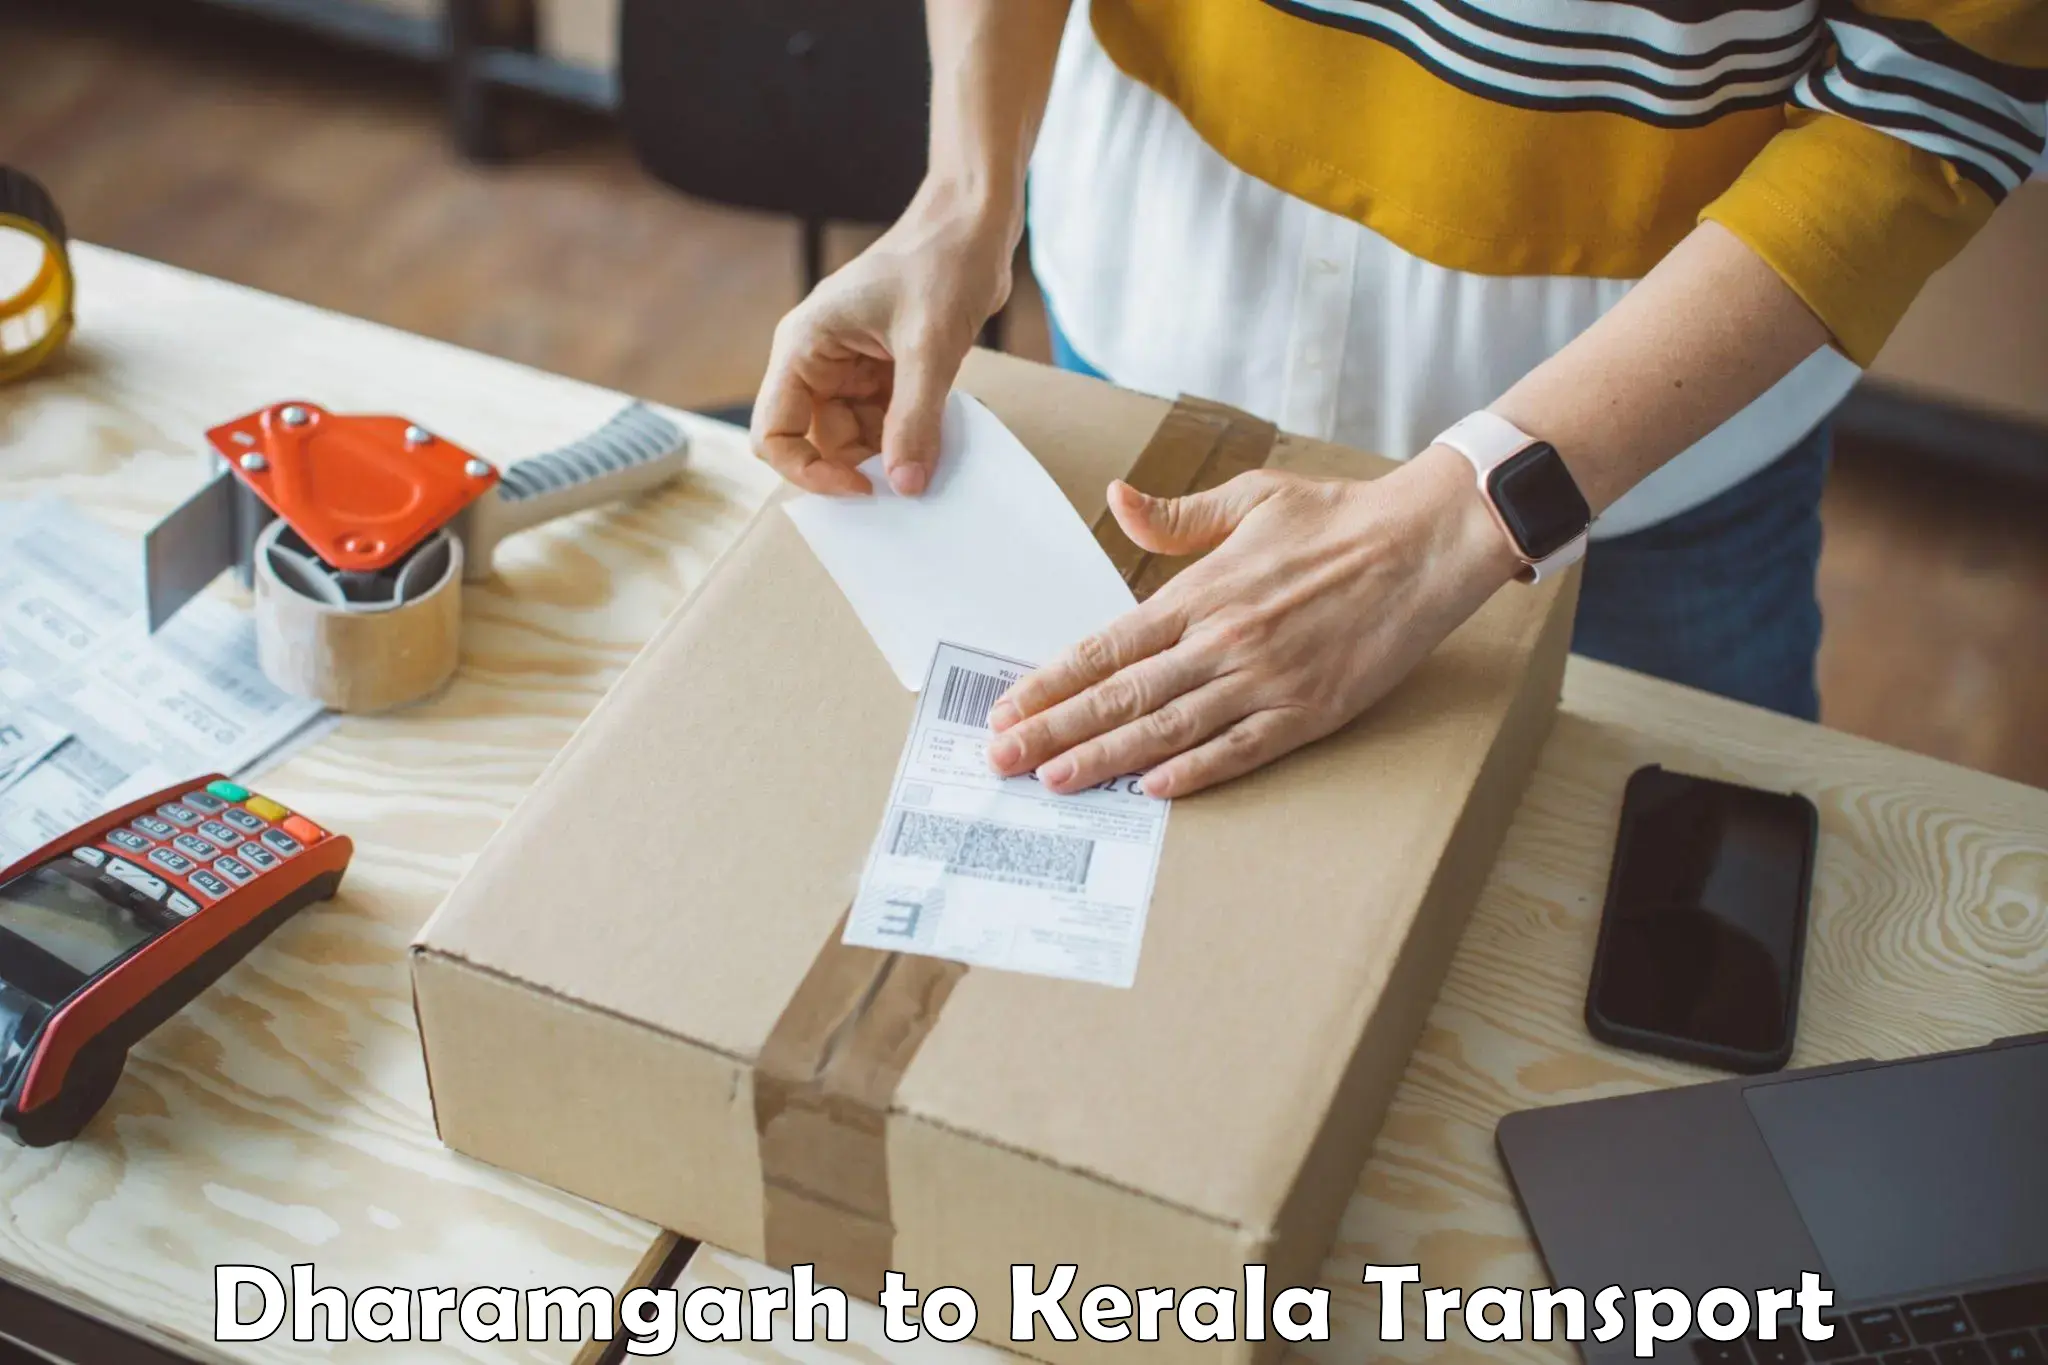 Container transport service Dharamgarh to Kannur